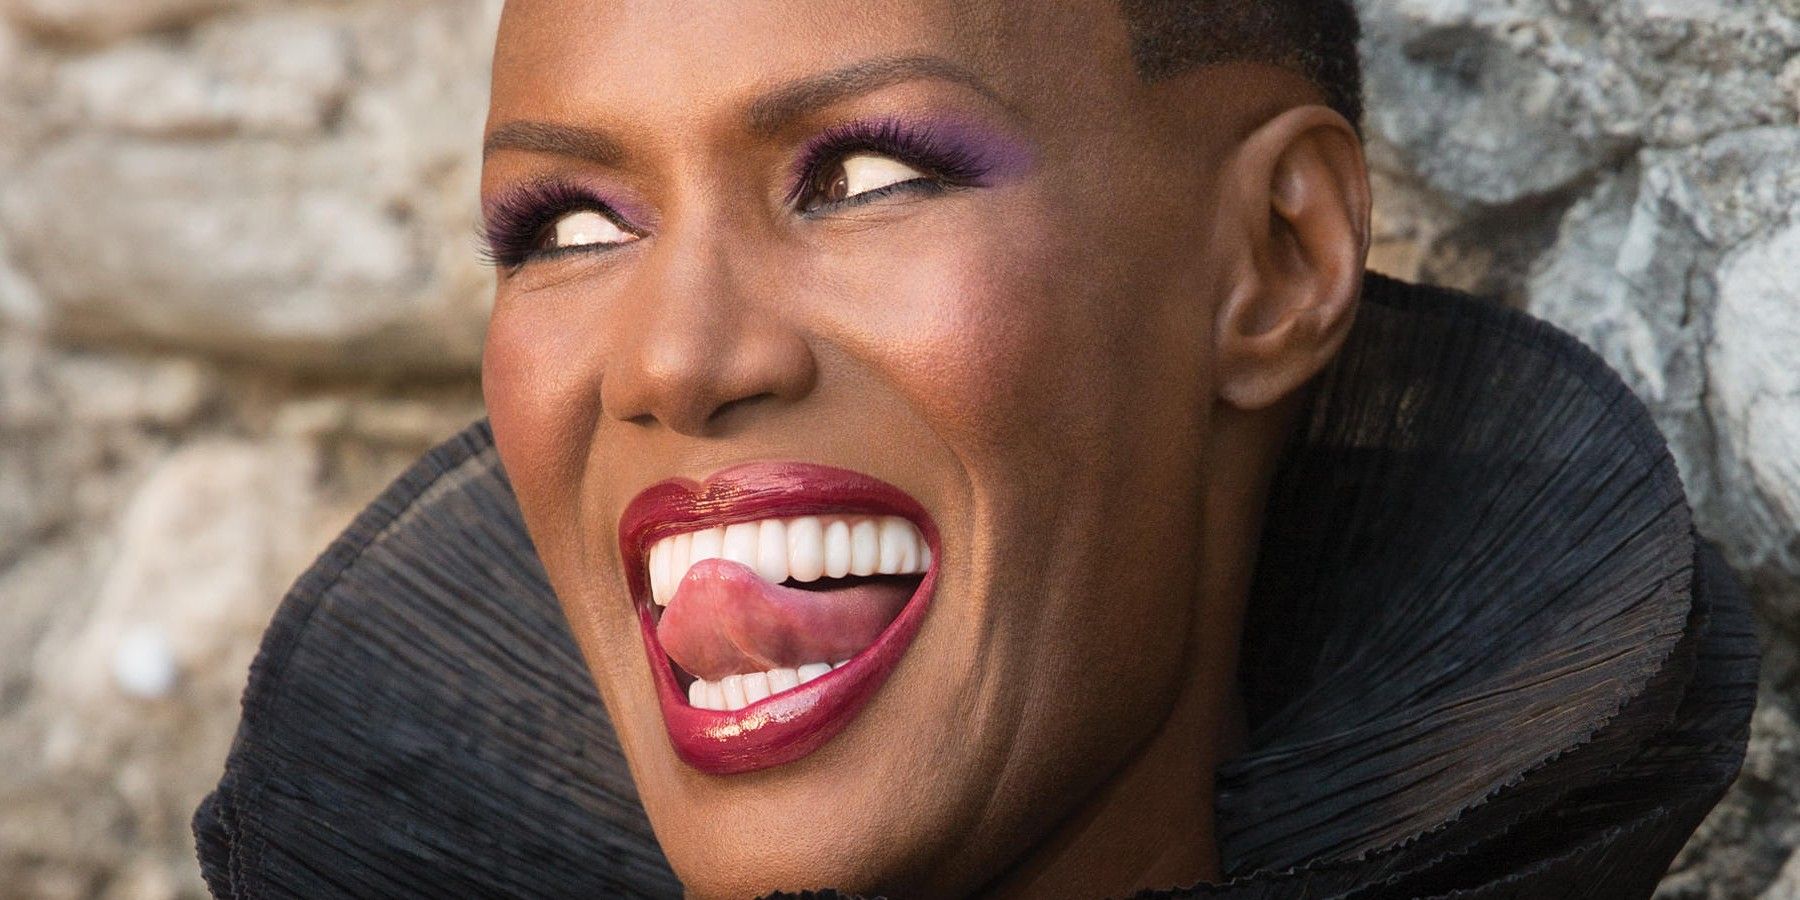 May Day (Grace Jones) licking lips in A View to a Kill James Bond